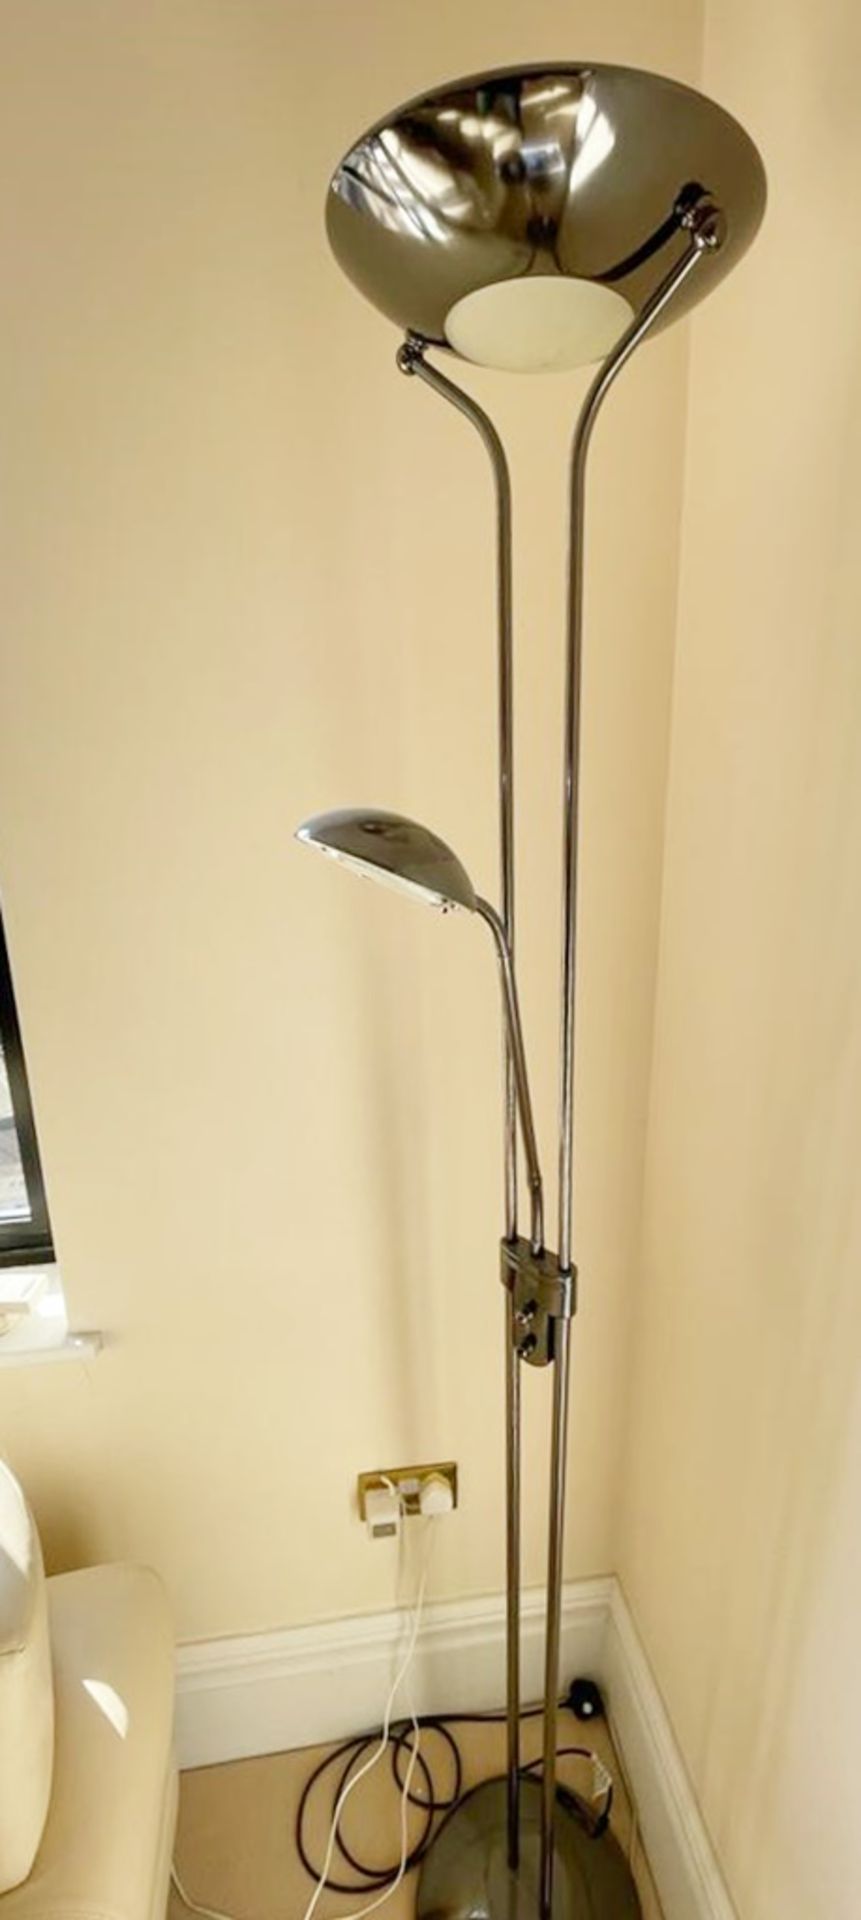 1 x Chrome Floor Lamp With Uplight and Reading Light - Approx Height 6ft - NO VAT ON THE HAMMER - - Image 3 of 3